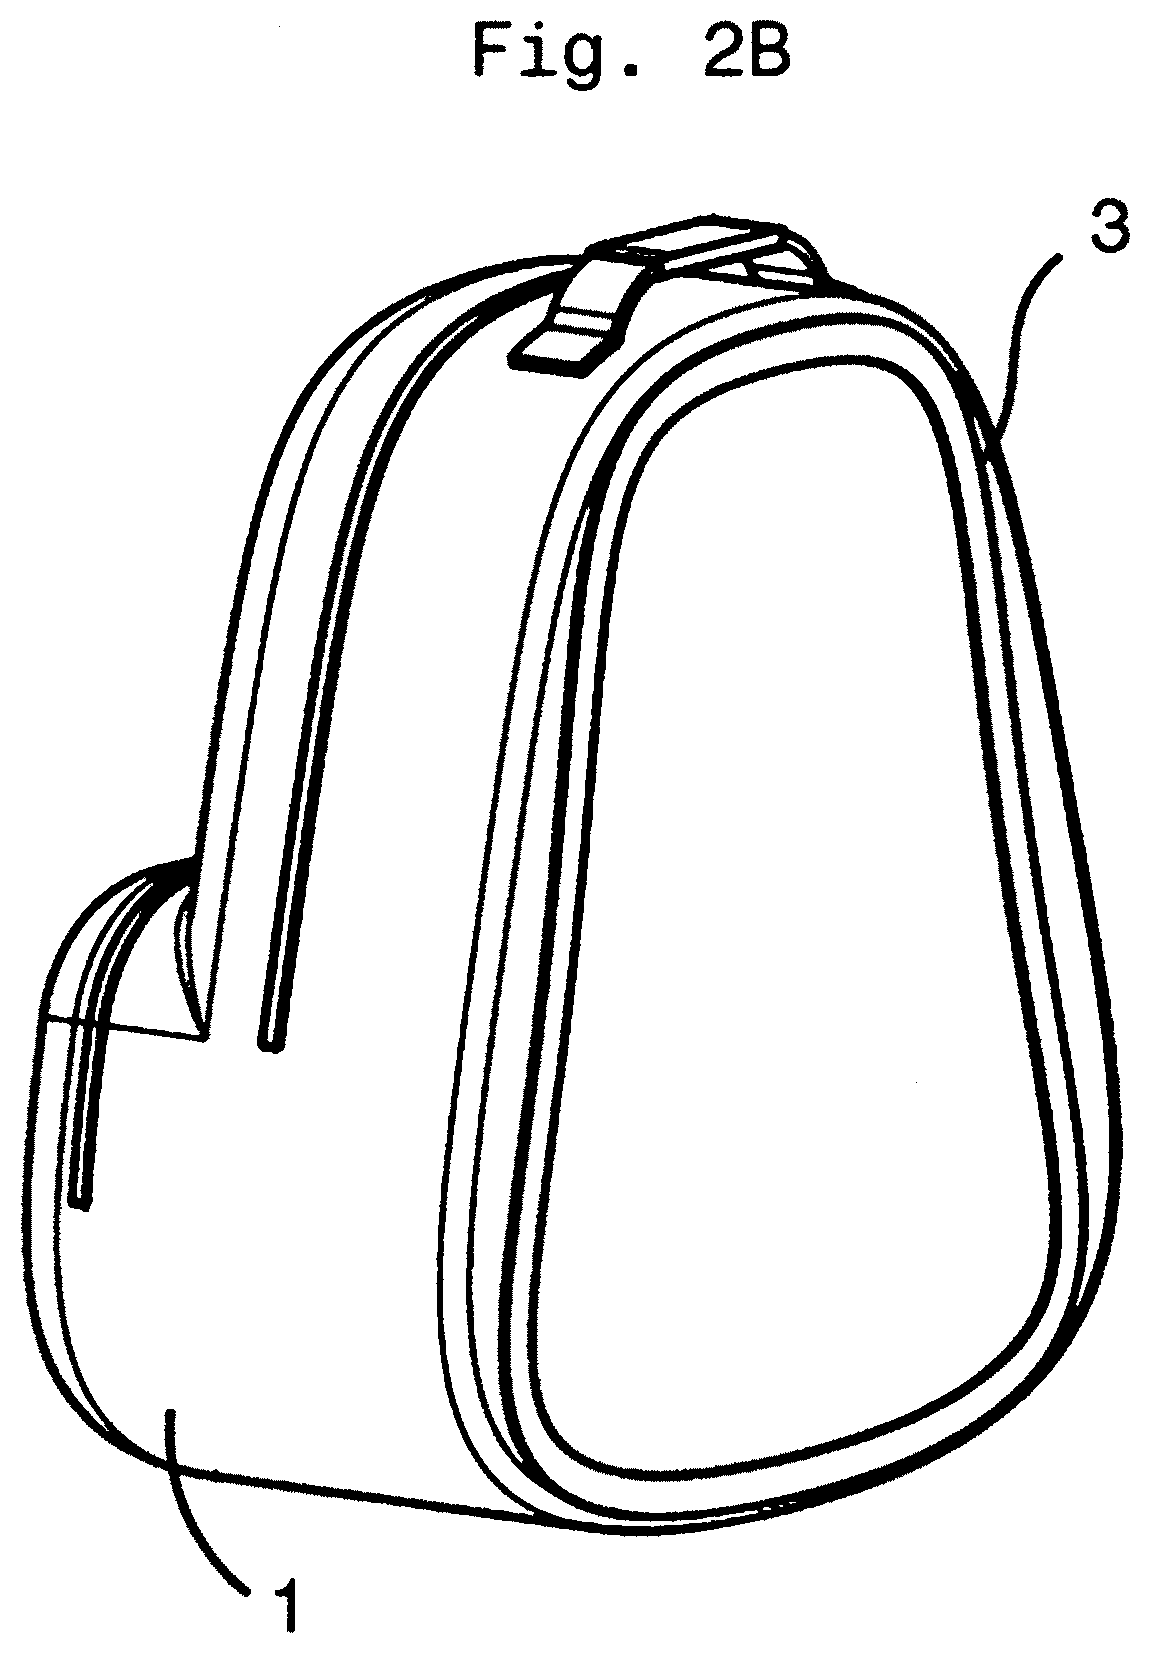 Combination backpack with removable back support